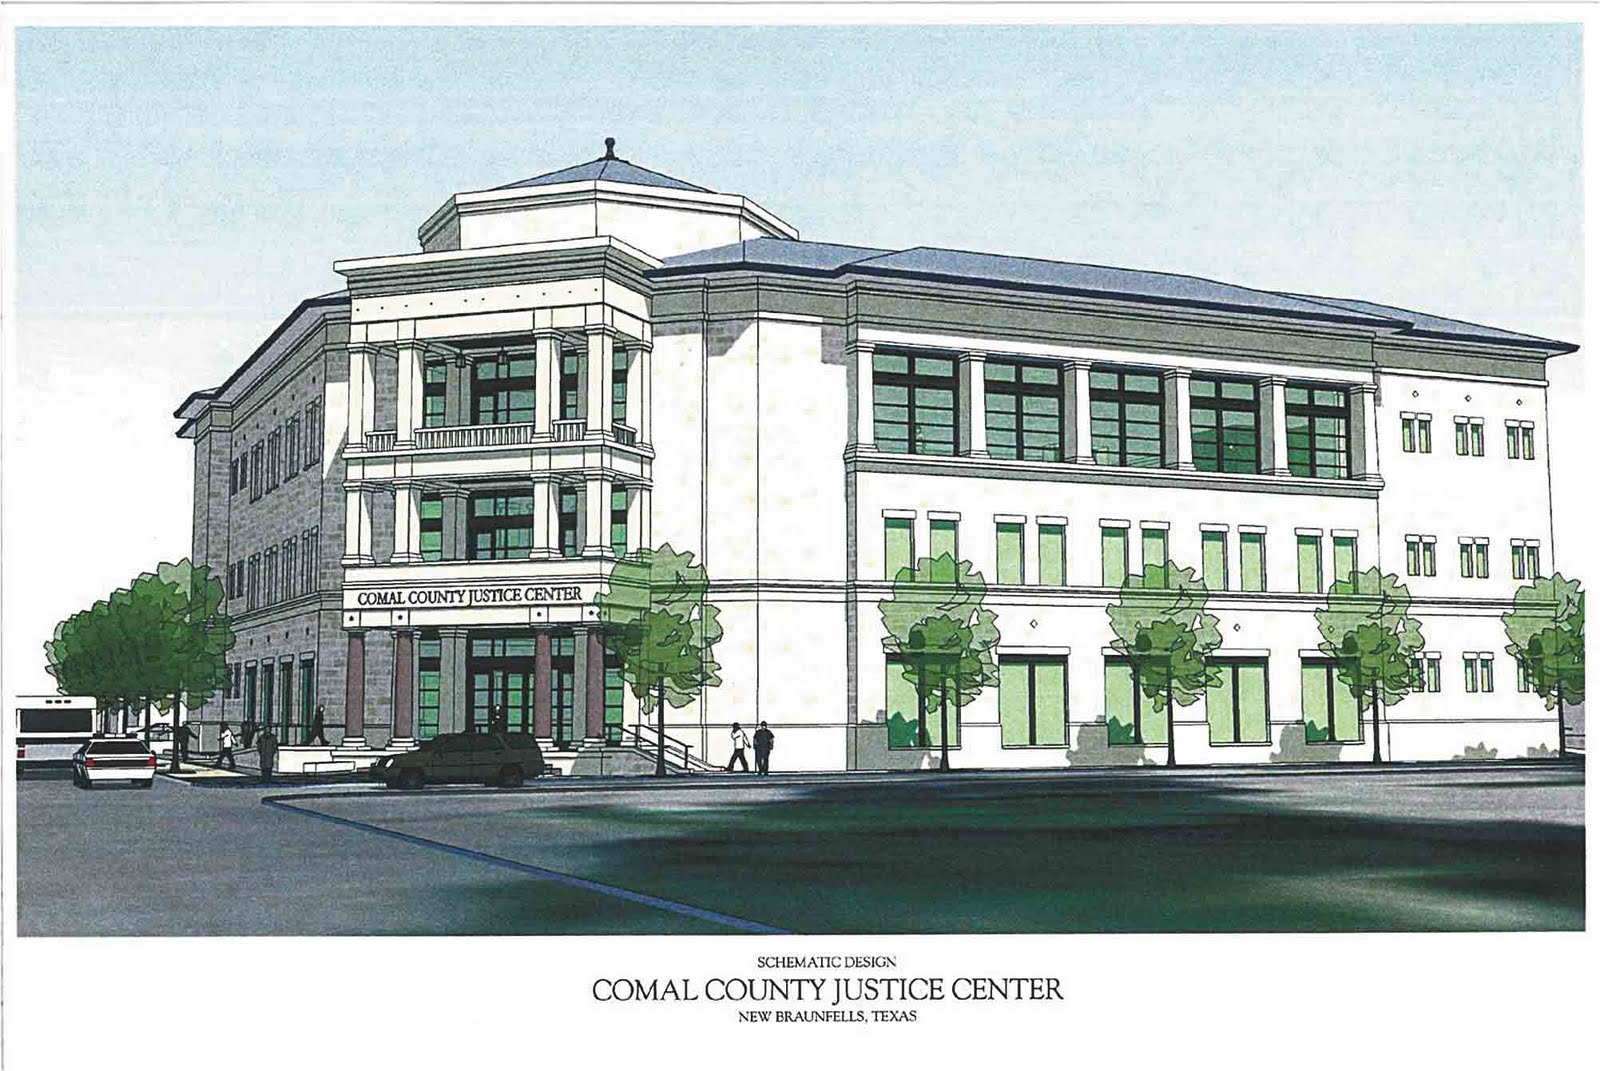 Comal County Justice Center in New Braunfels, Texas – Johnson County  Justice Center